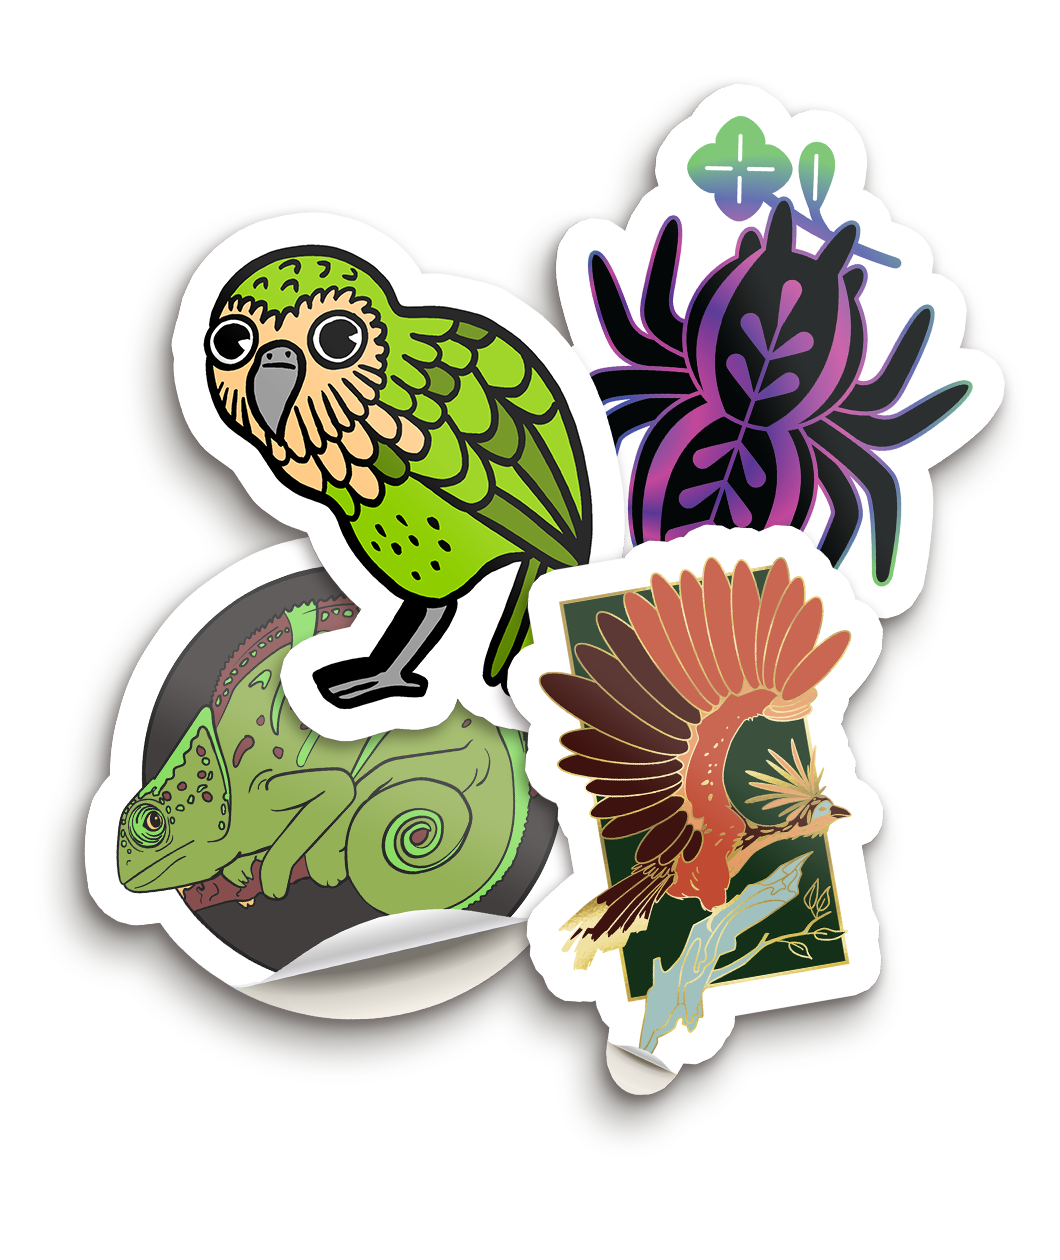 A set of four stickers of different cartoon drawn bizarre beasts - a green kakapo with a tan face and green body, a reflective spider holding a leaf, a green chameleon against a black background, and a red and brown hoatzin against a dark green background on a blue branch - from Bizarre Beasts